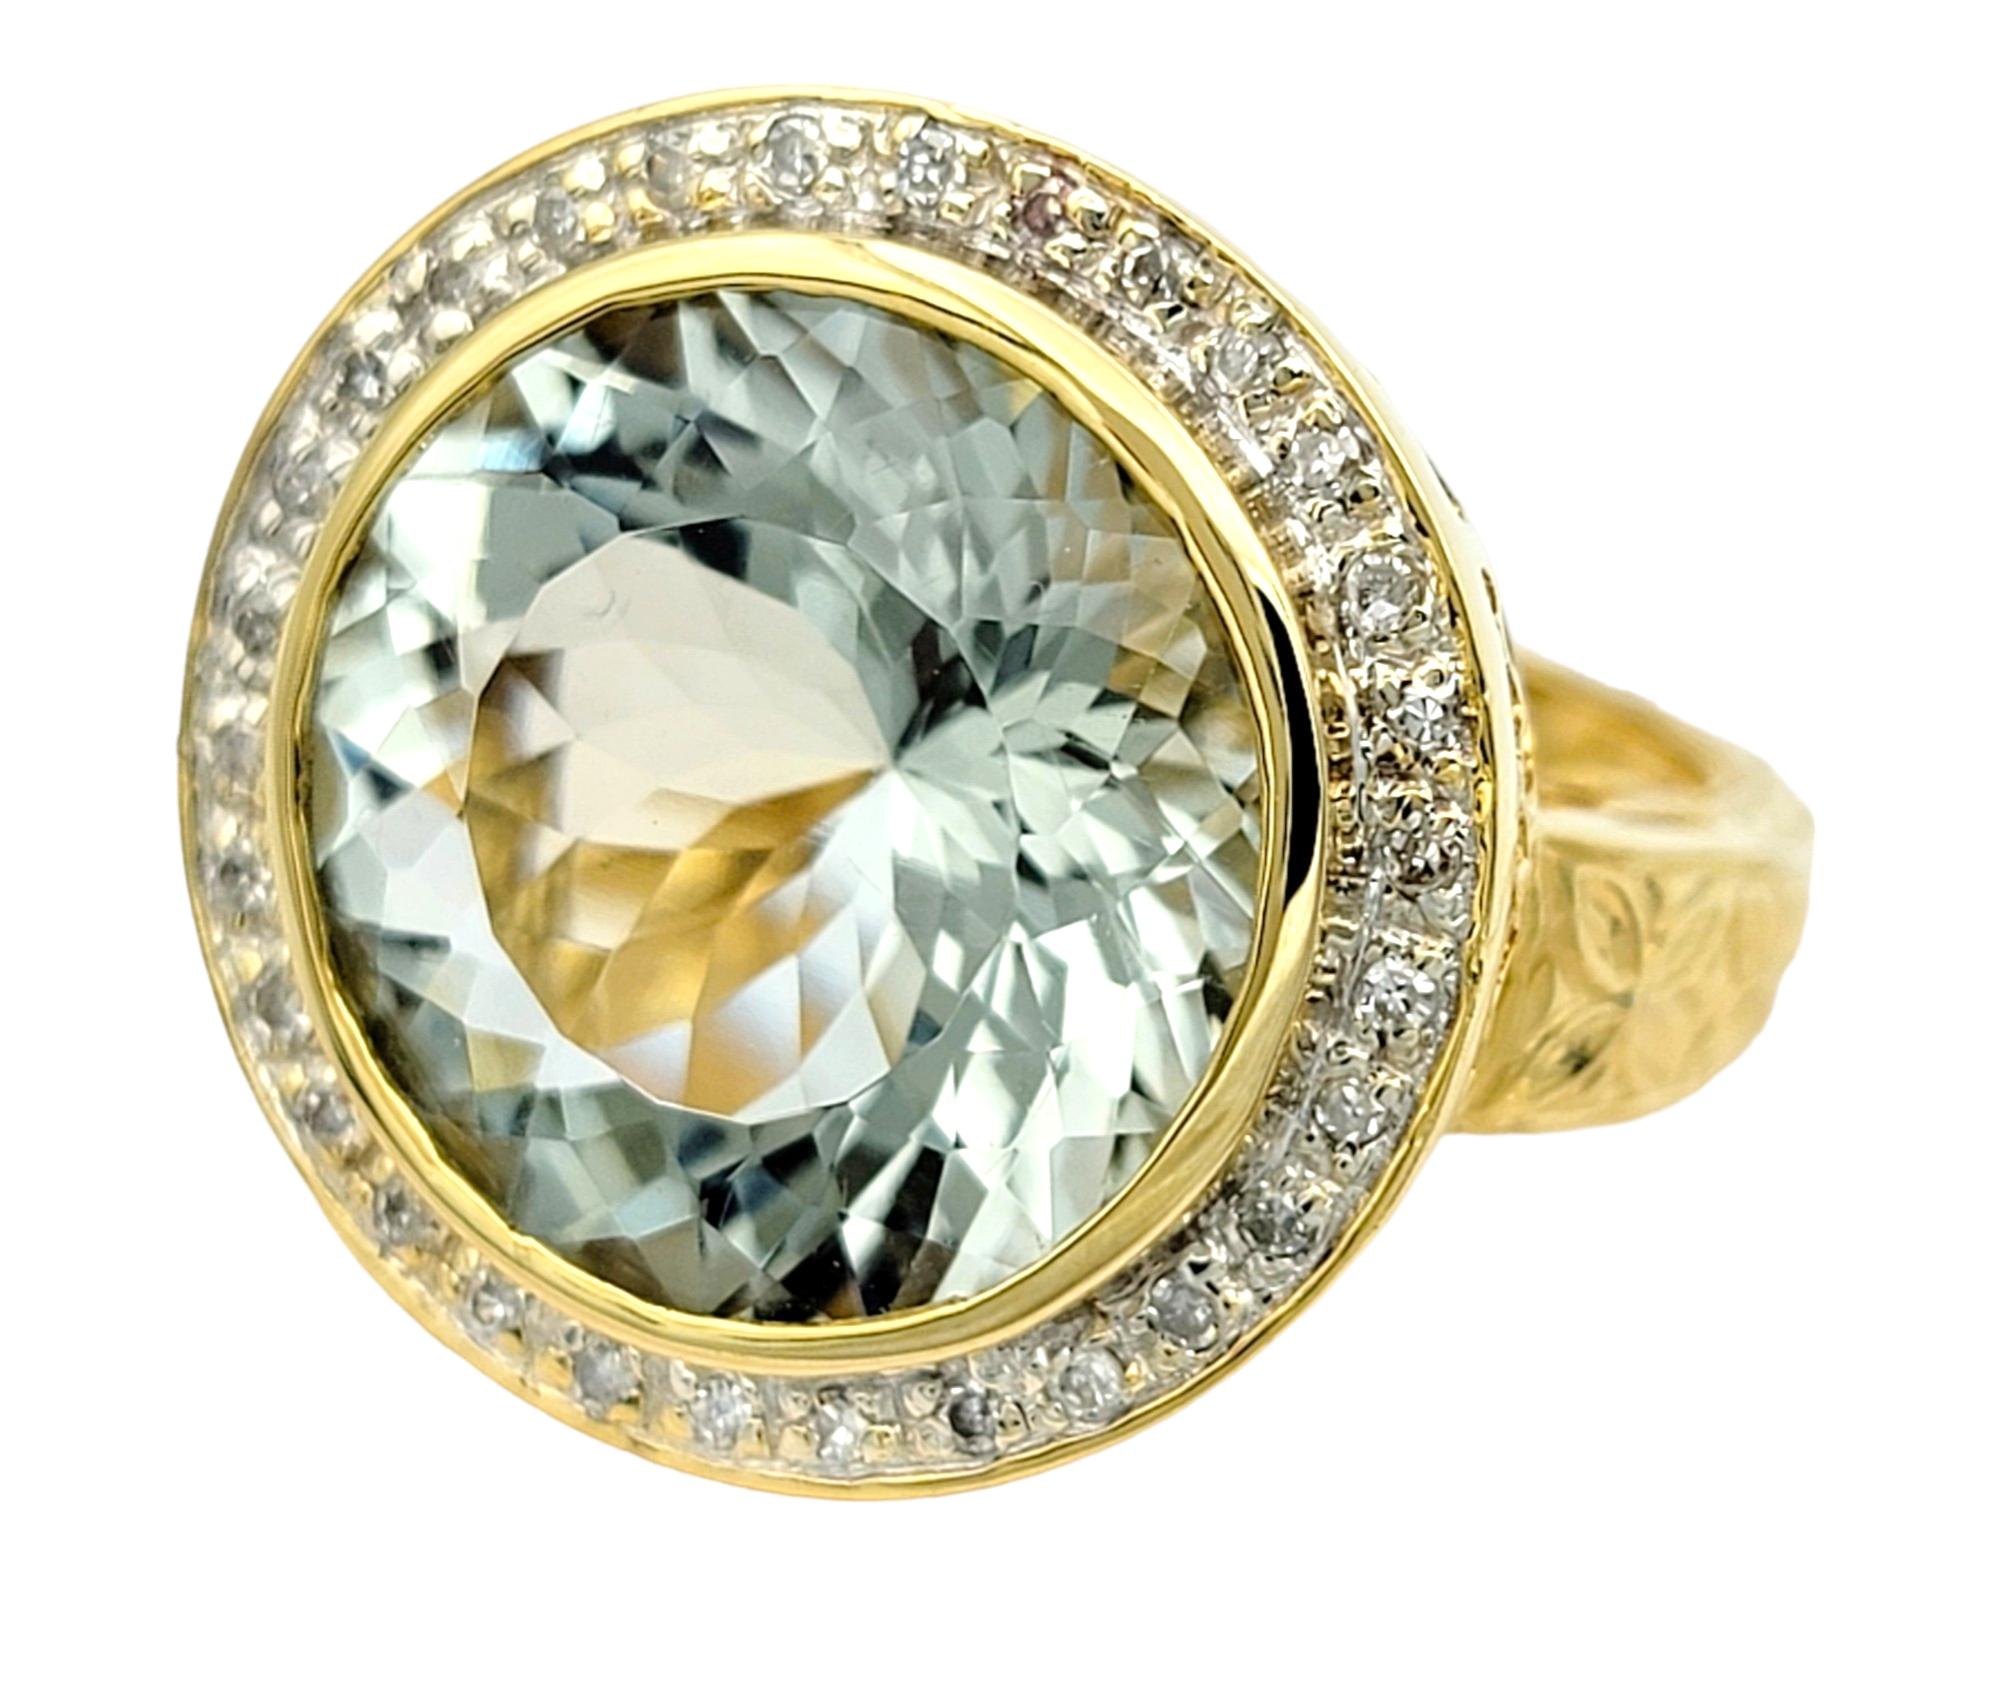 Ring Size: 5

Radiating with a mesmerizing hue that blends the serene tones of green and blue, the round prasiolite gemstone takes center stage in this exquisite ring. Set in elegant 14 karat white gold, the prasiolite is adorned with a halo of